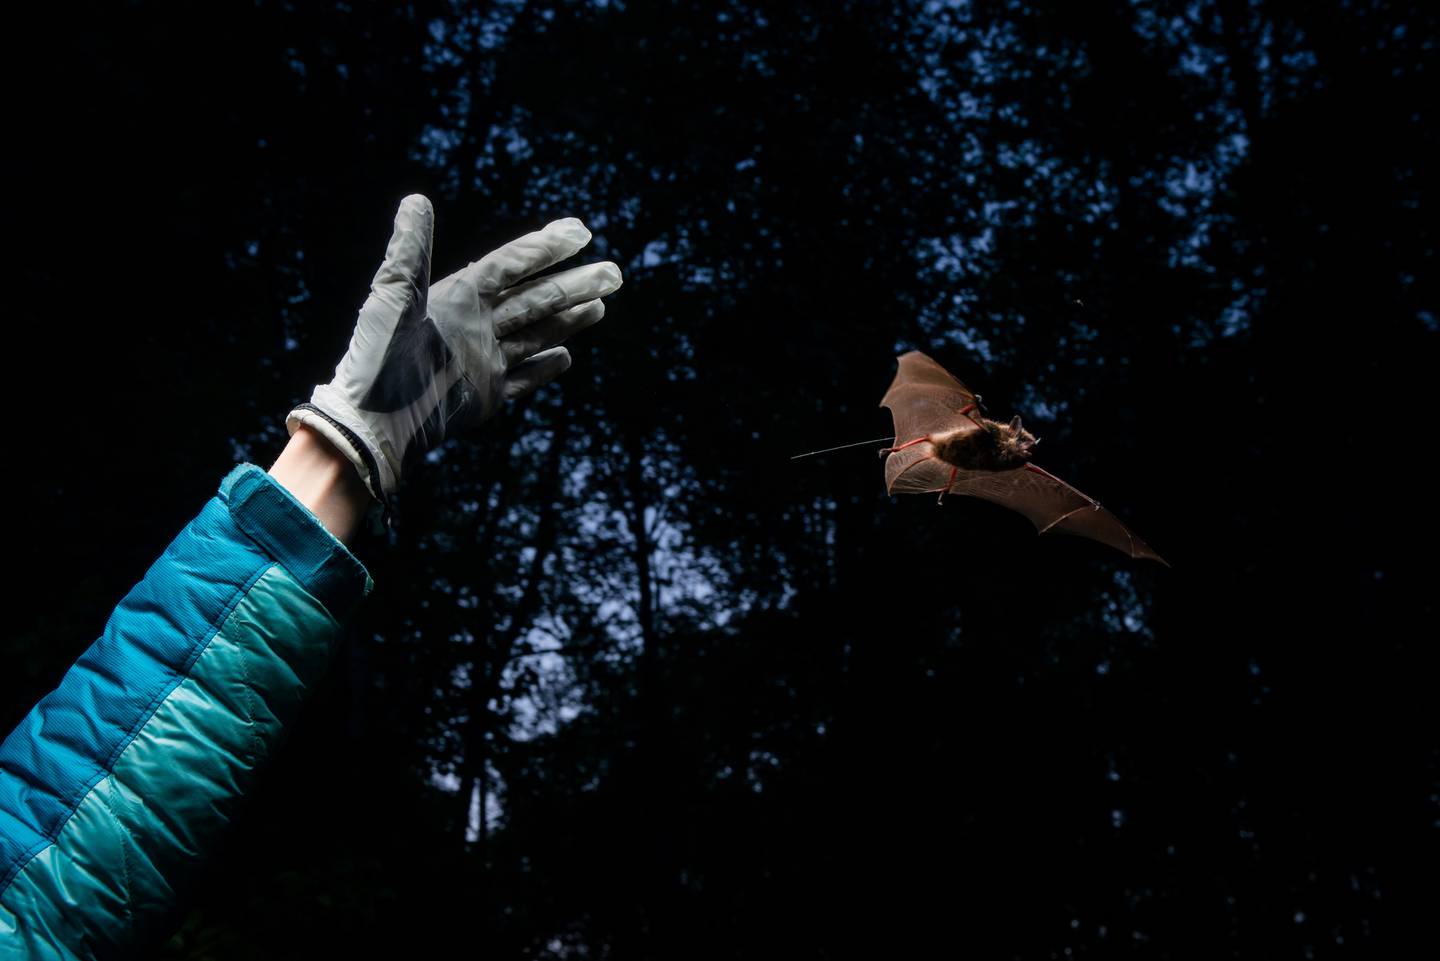 Biologist Jesika Reimer releases a little brown bat with a radio transmitter on its back